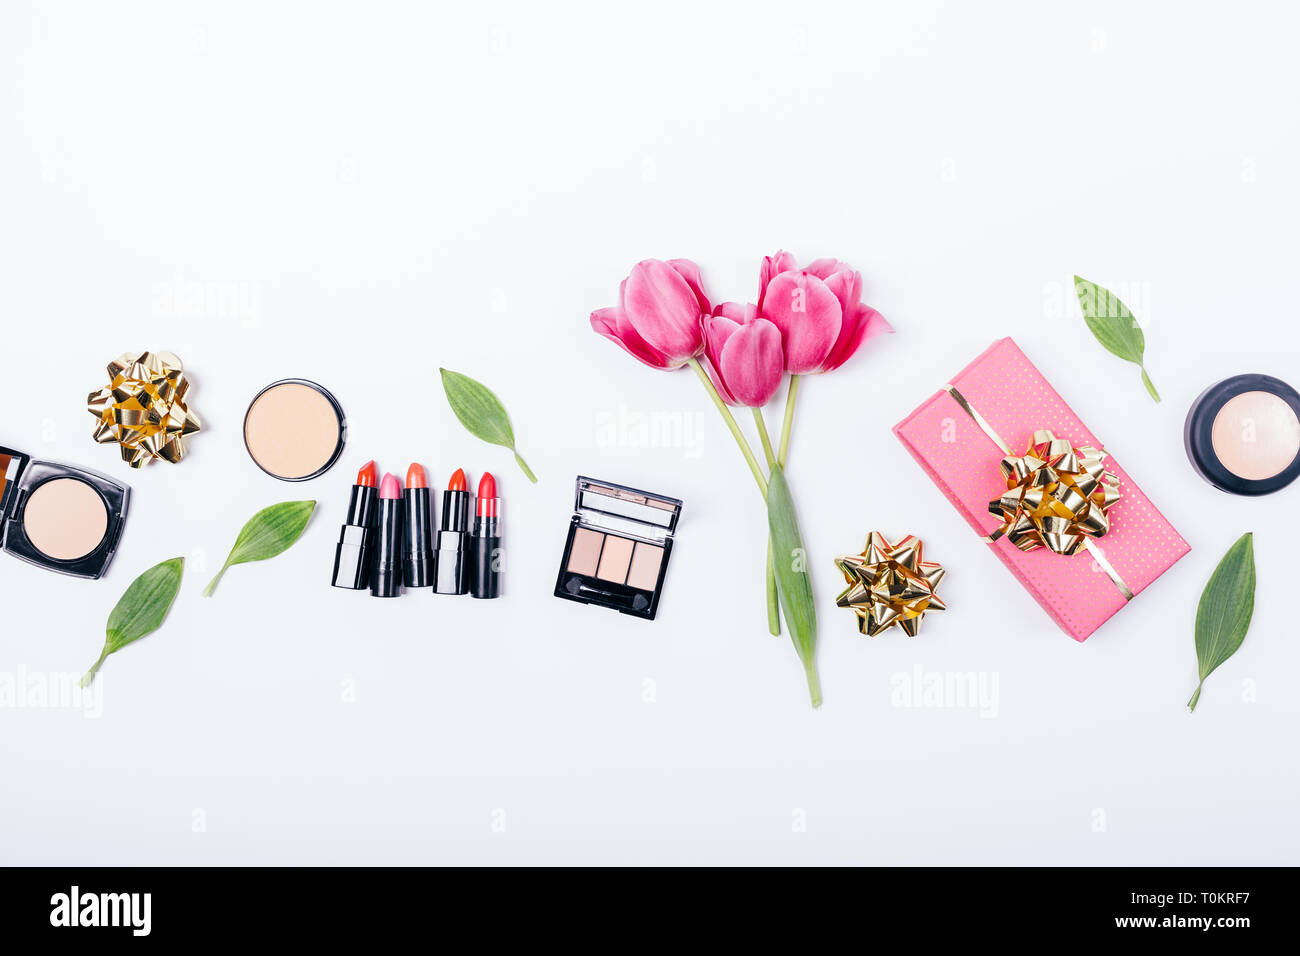 Bouquet of pink tulips near makeup beauty products and gift box on white background, top view. Festive flat lay composition of professional cosmetics: Stock Photo